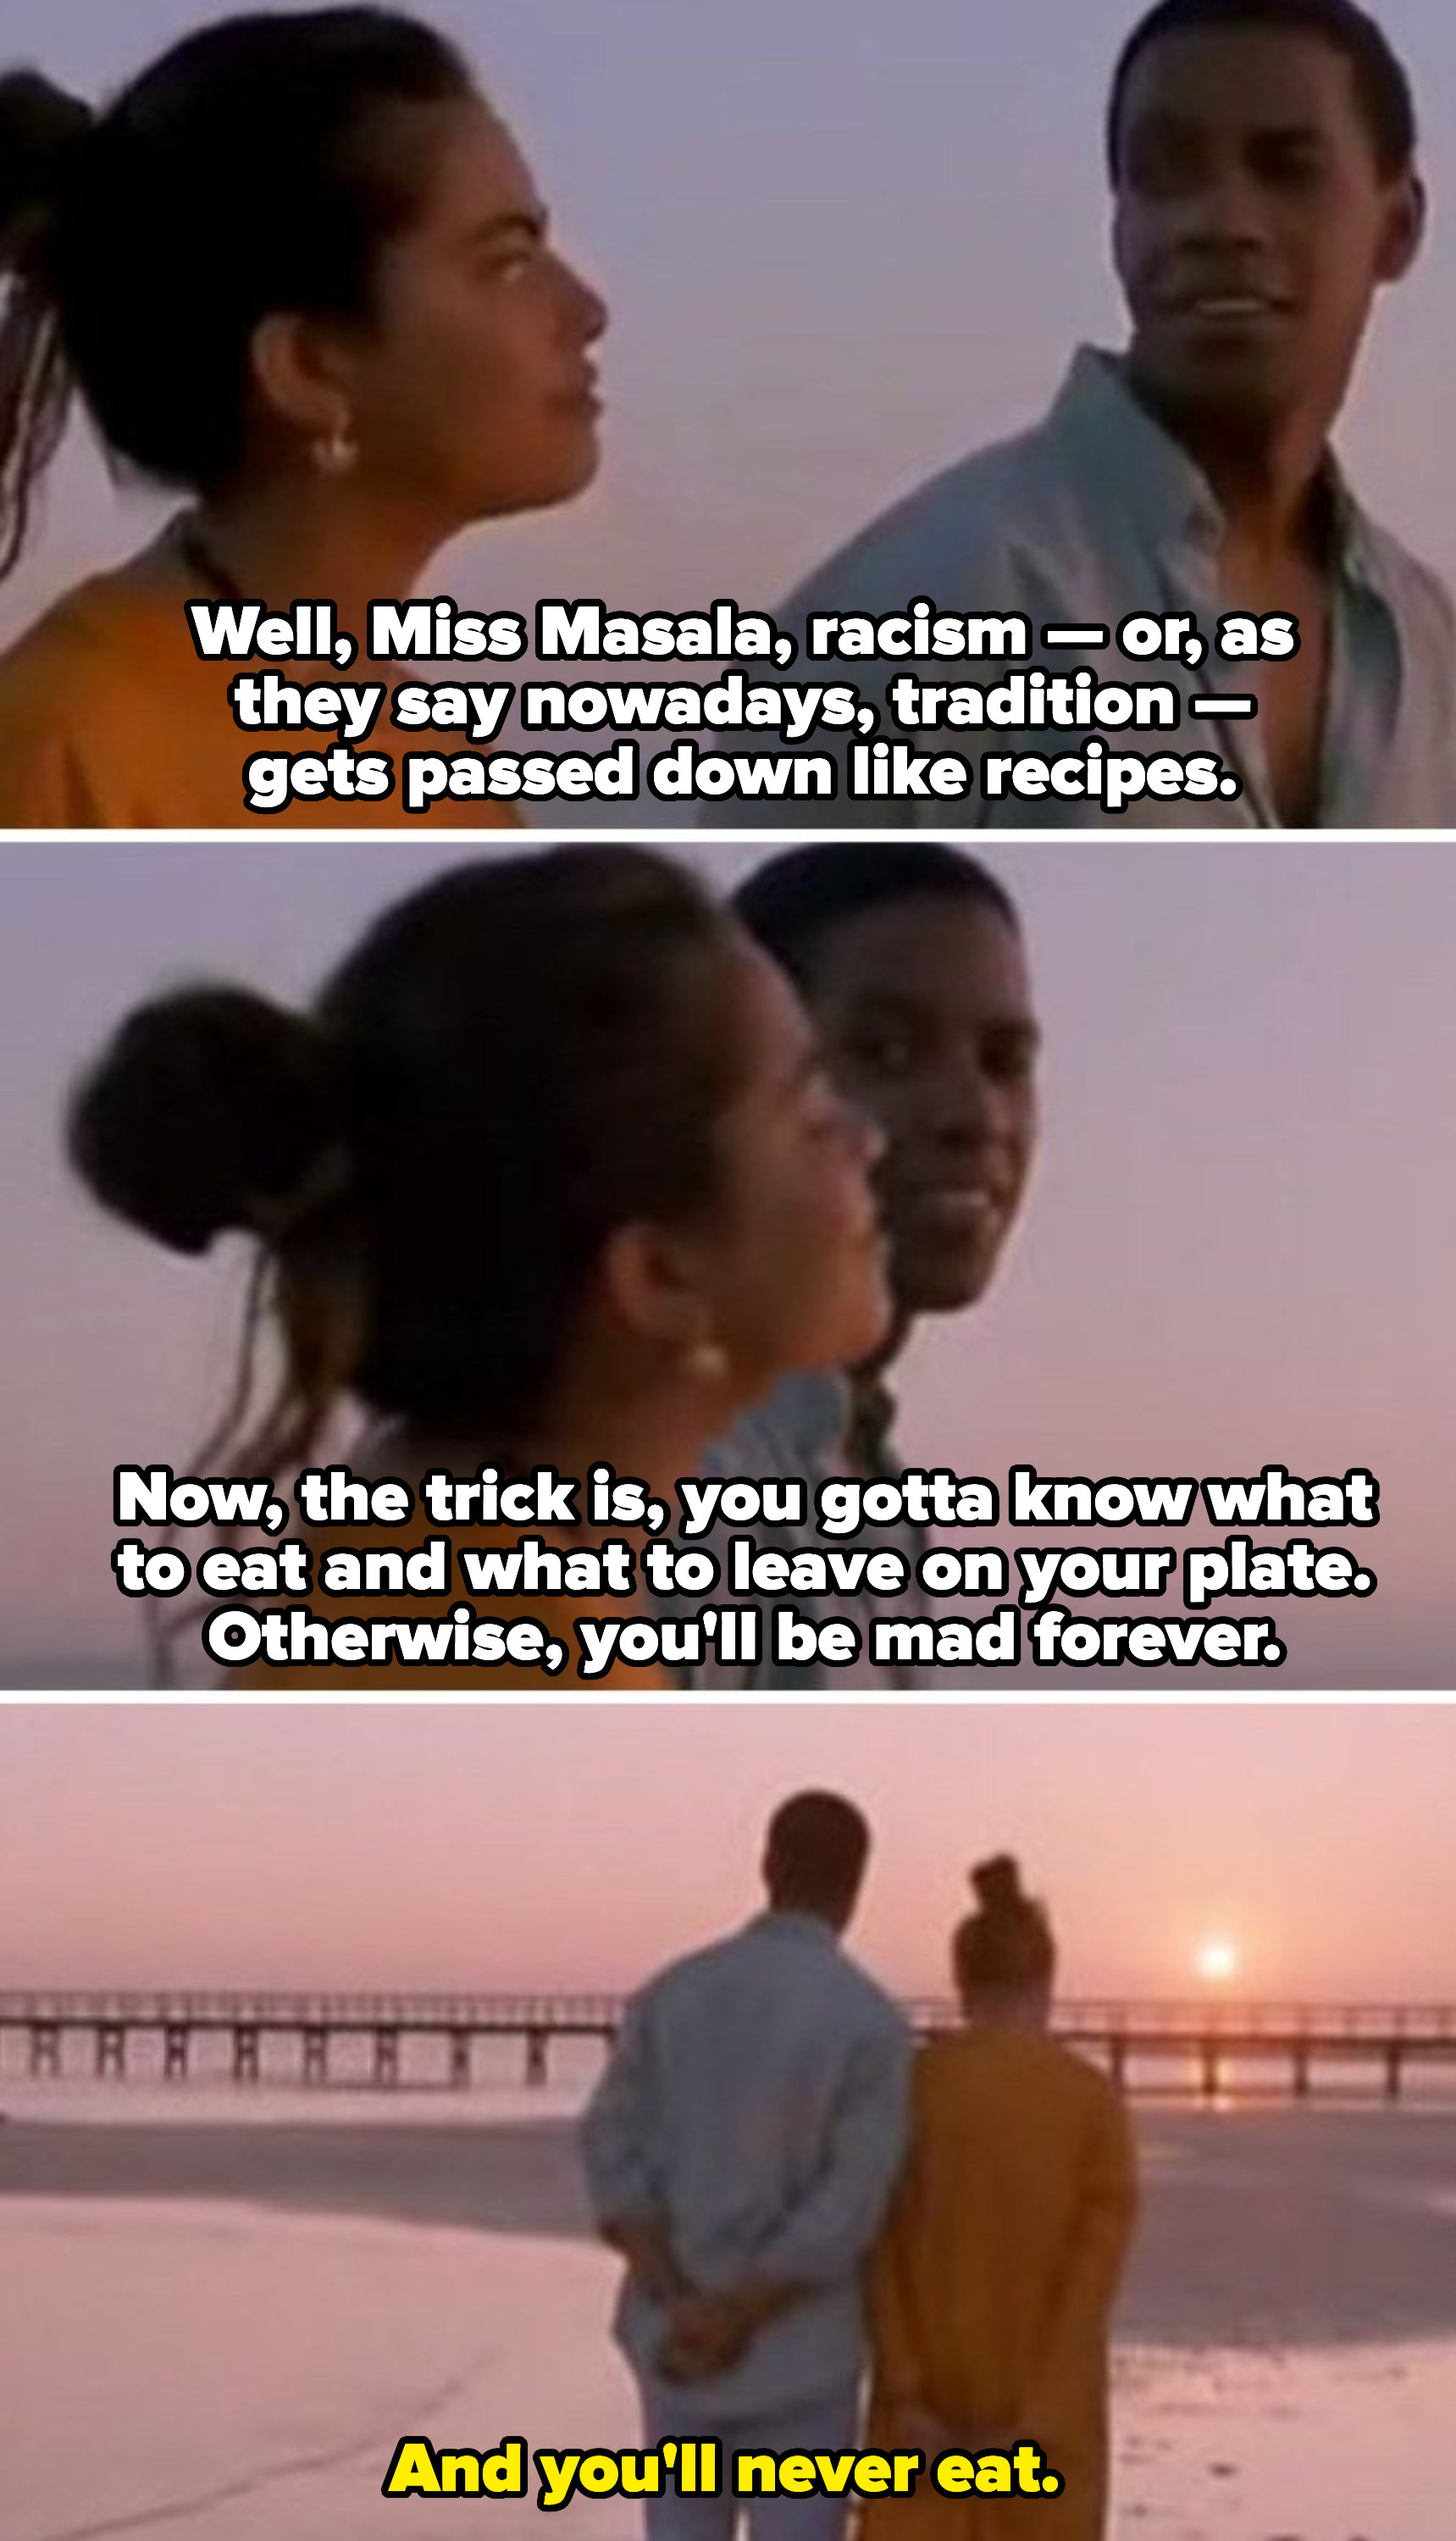 Demetrius to Mina: &quot;Racism — or, as they say nowadays, tradition — gets passed down like recipes. Now, the trick is, you gotta know what to eat and what to leave on your plate. Otherwise, you&#x27;ll be mad forever&quot;